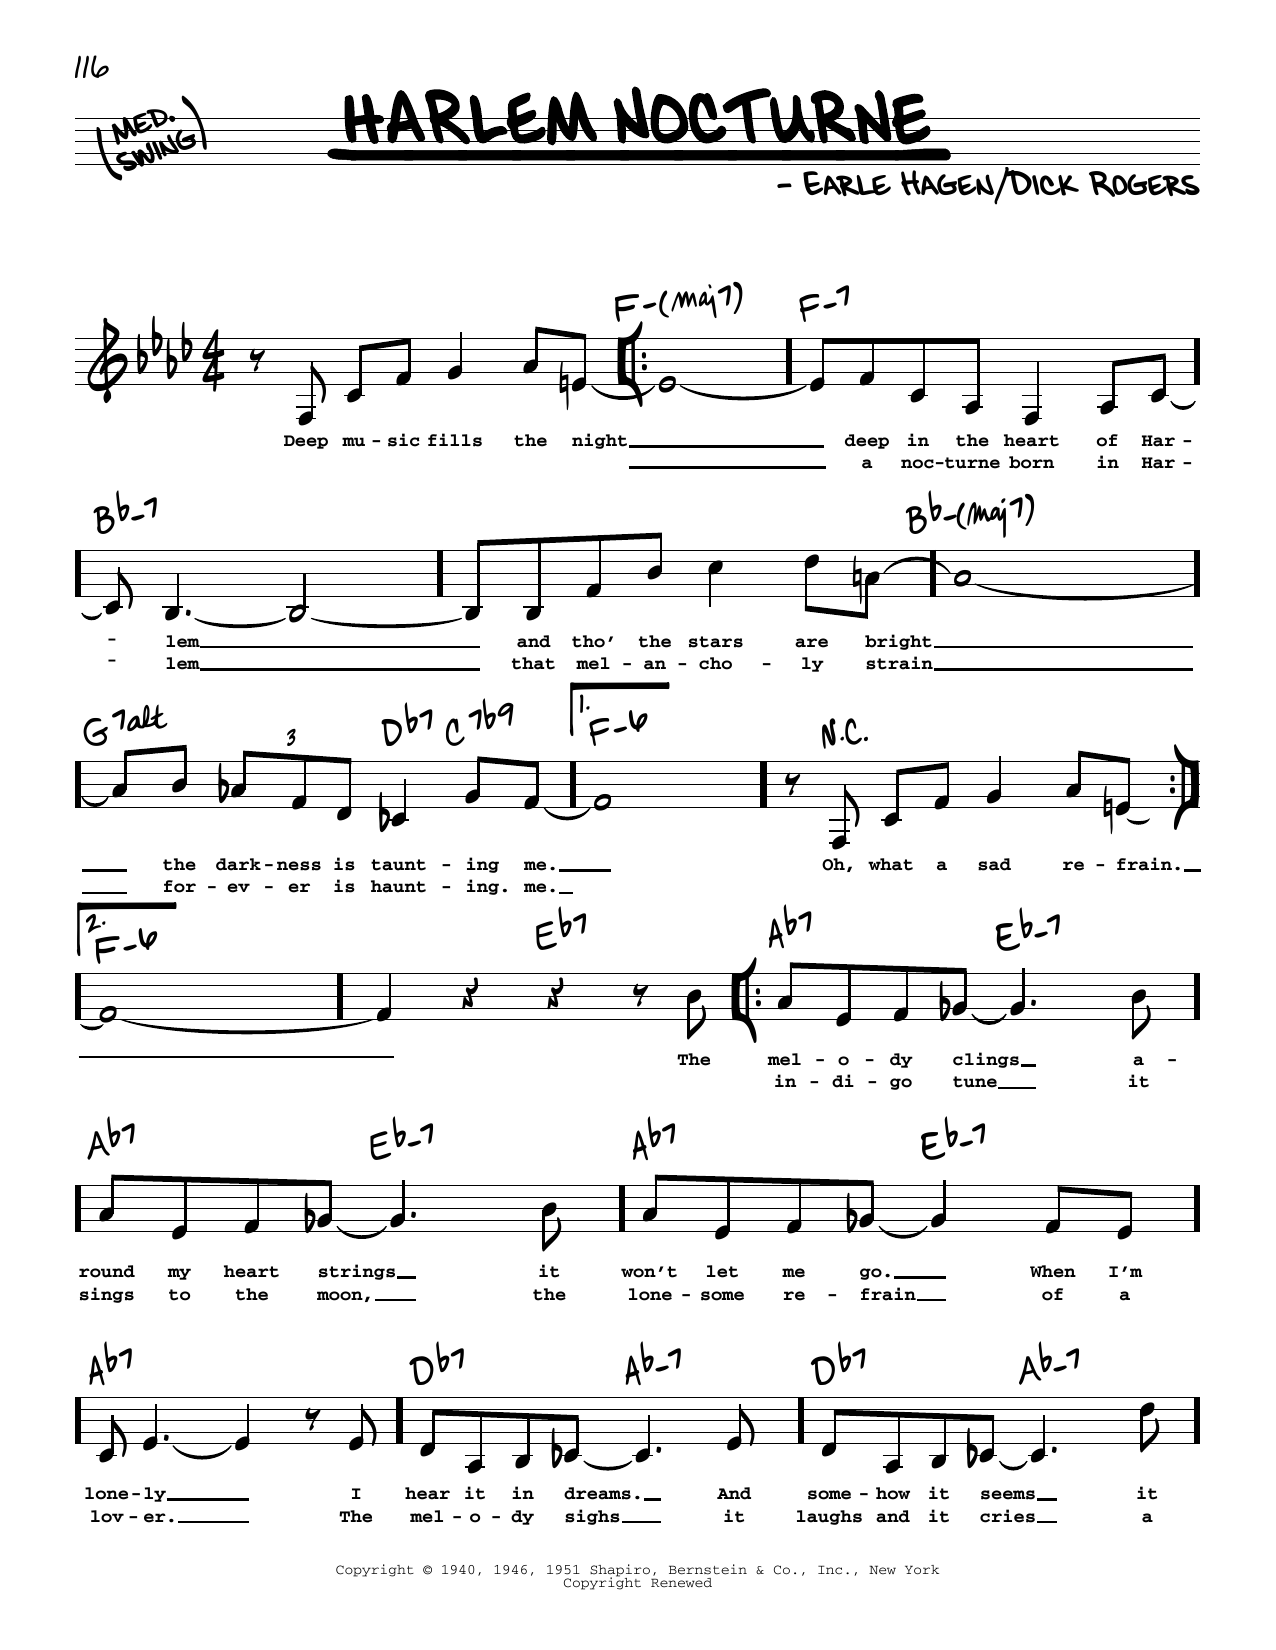 Dick Rogers Harlem Nocturne (Low Voice) sheet music notes printable PDF score